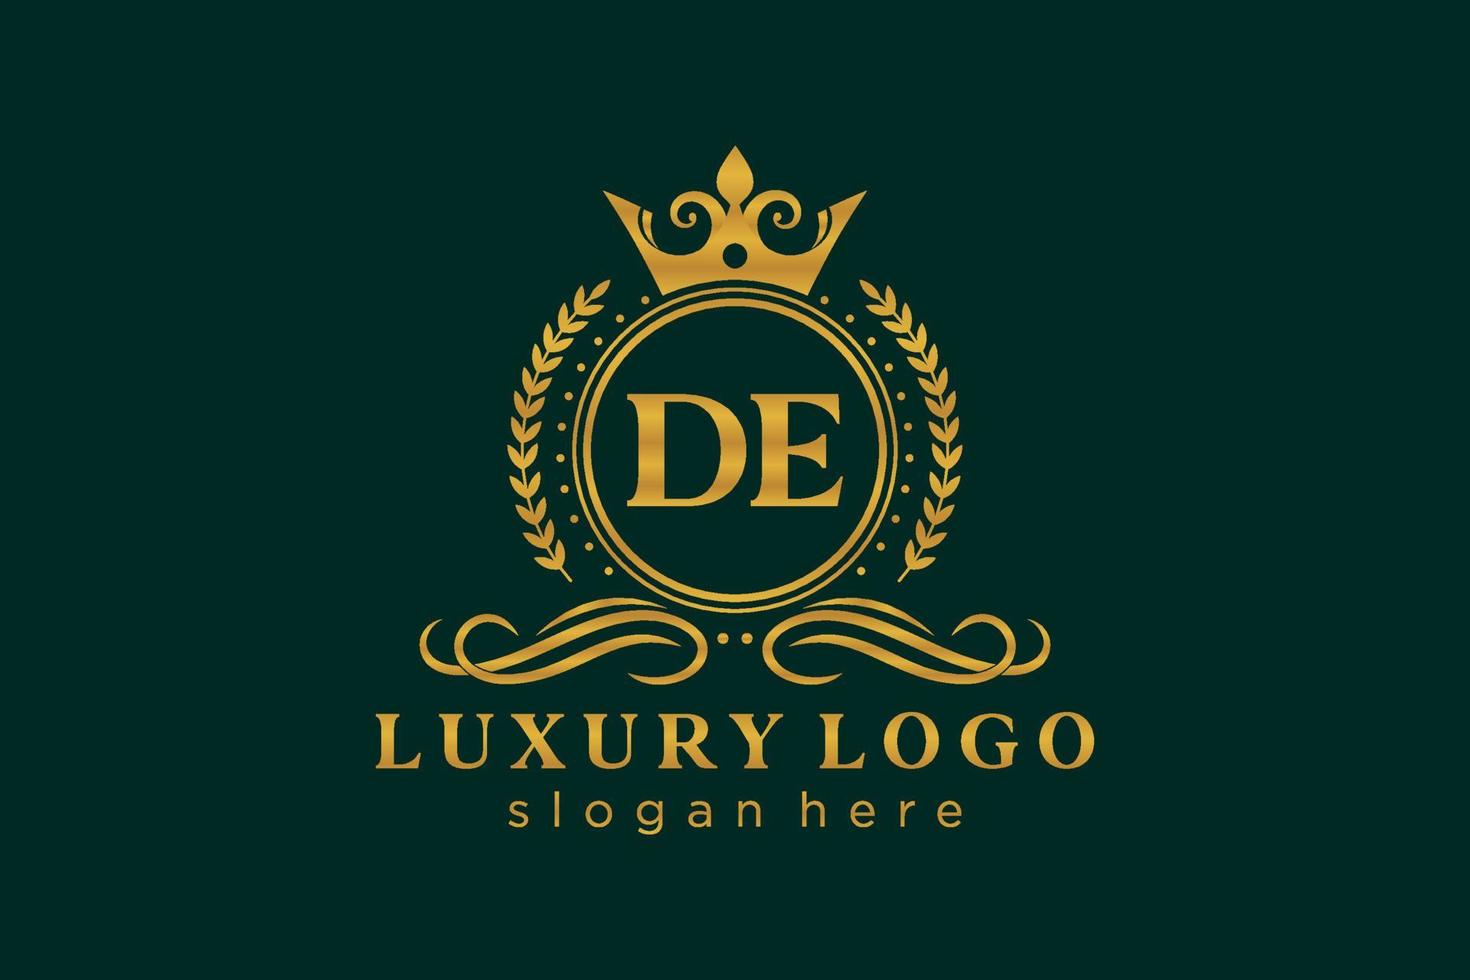 Initial DE Letter Royal Luxury Logo template in vector art for Restaurant, Royalty, Boutique, Cafe, Hotel, Heraldic, Jewelry, Fashion and other vector illustration.